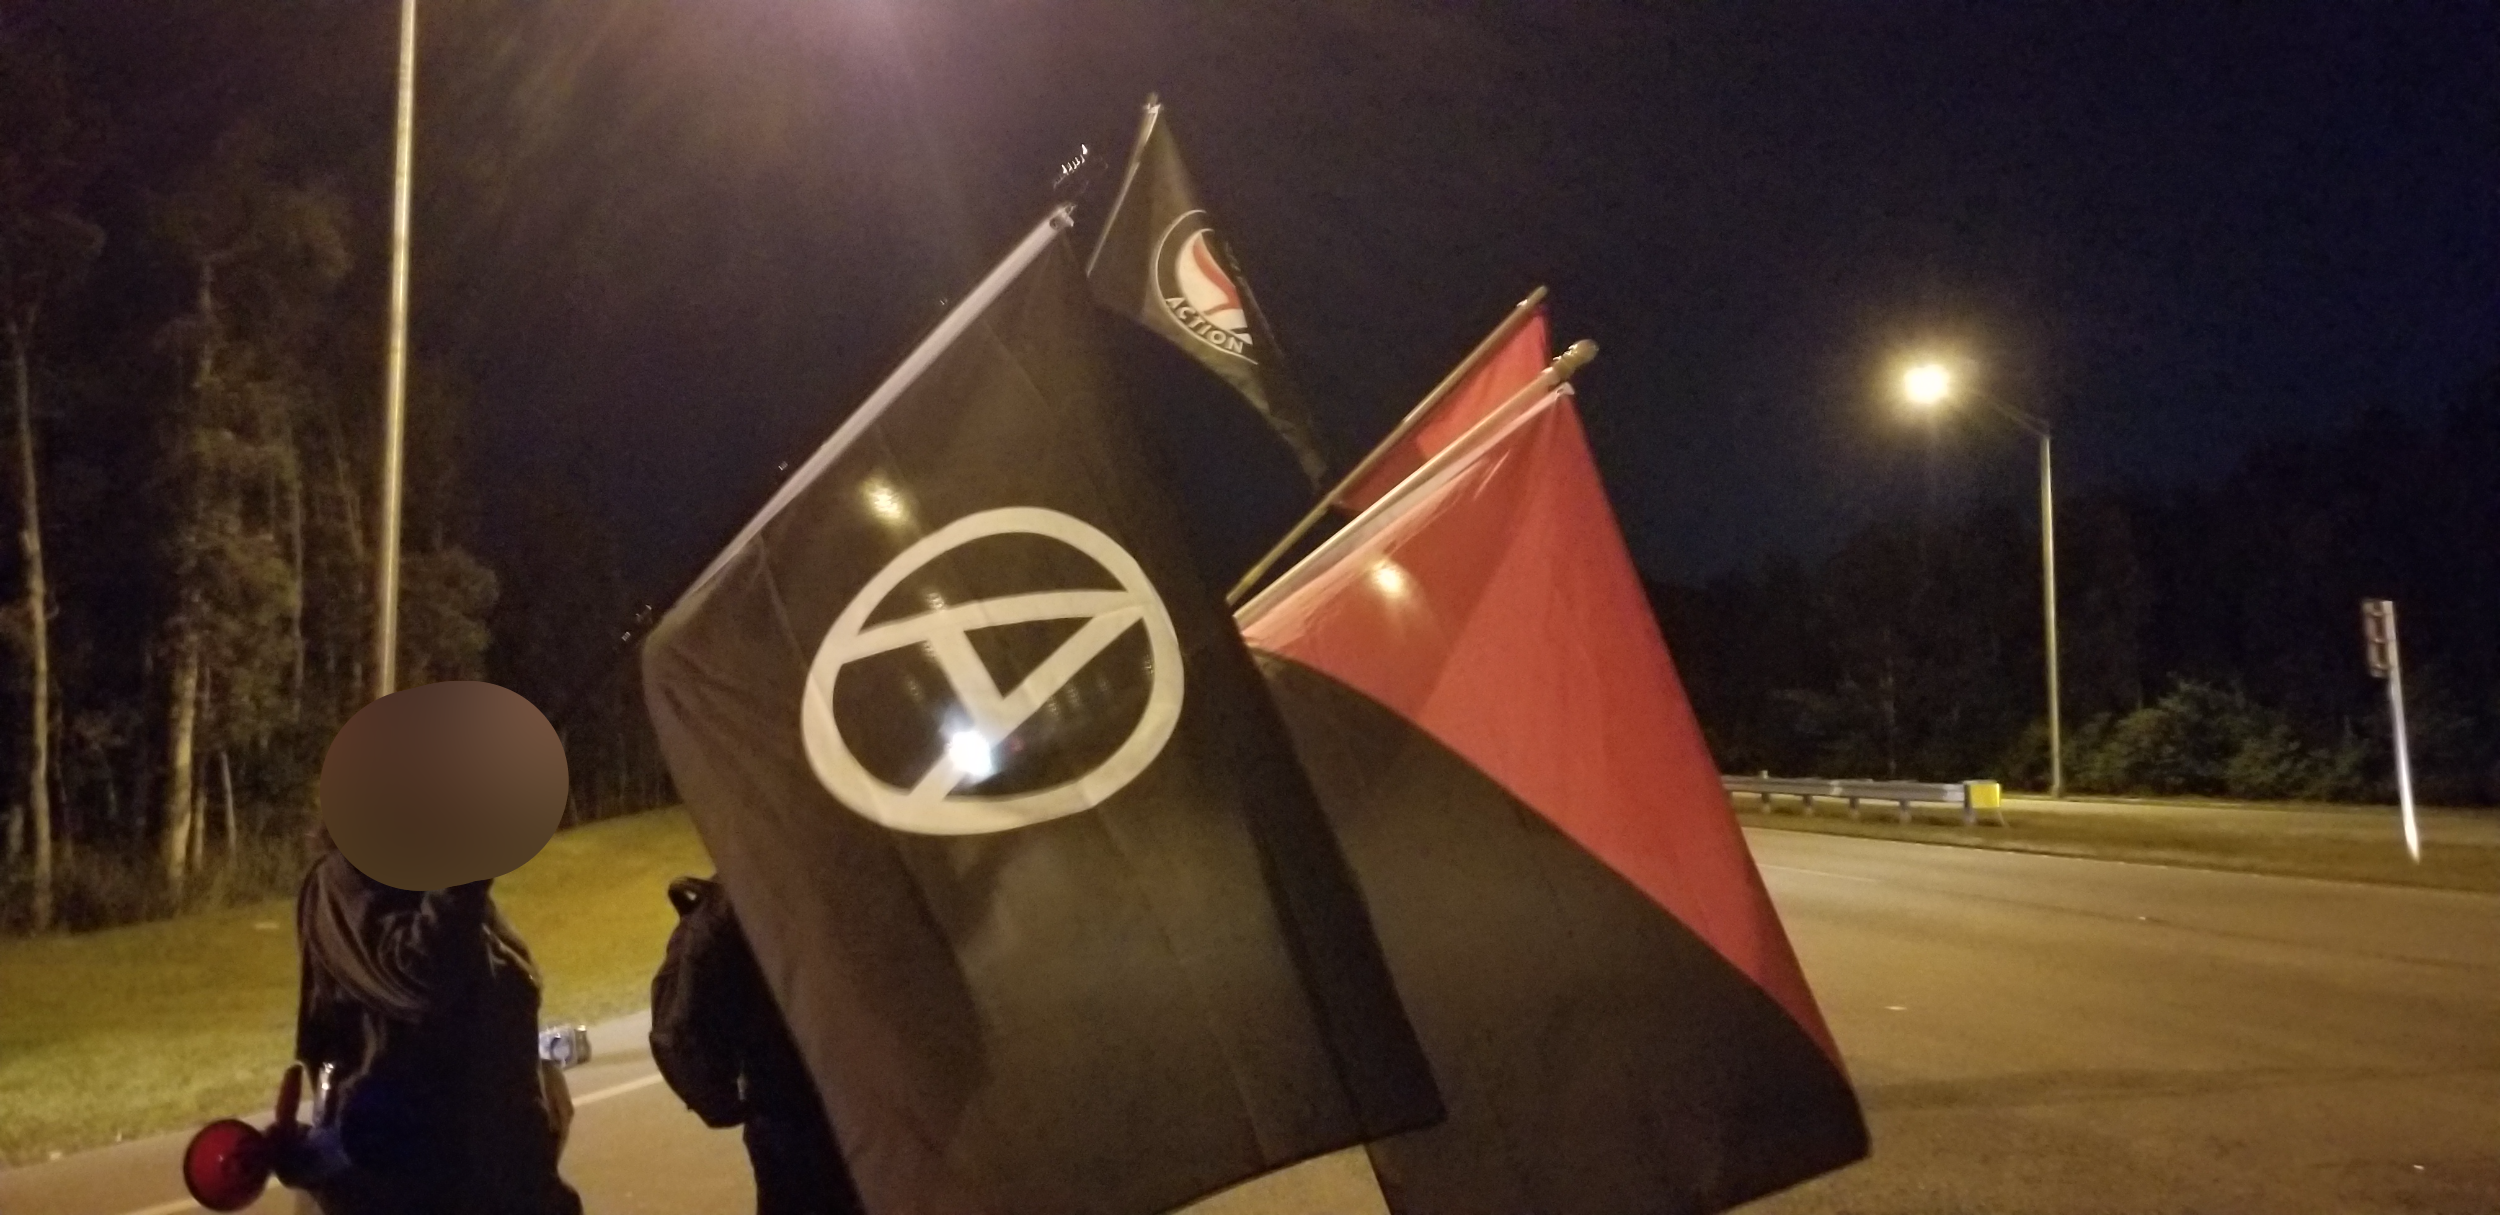 Anarchists Protest at Krome Detention Center in Miami in Solidarity With Detainees